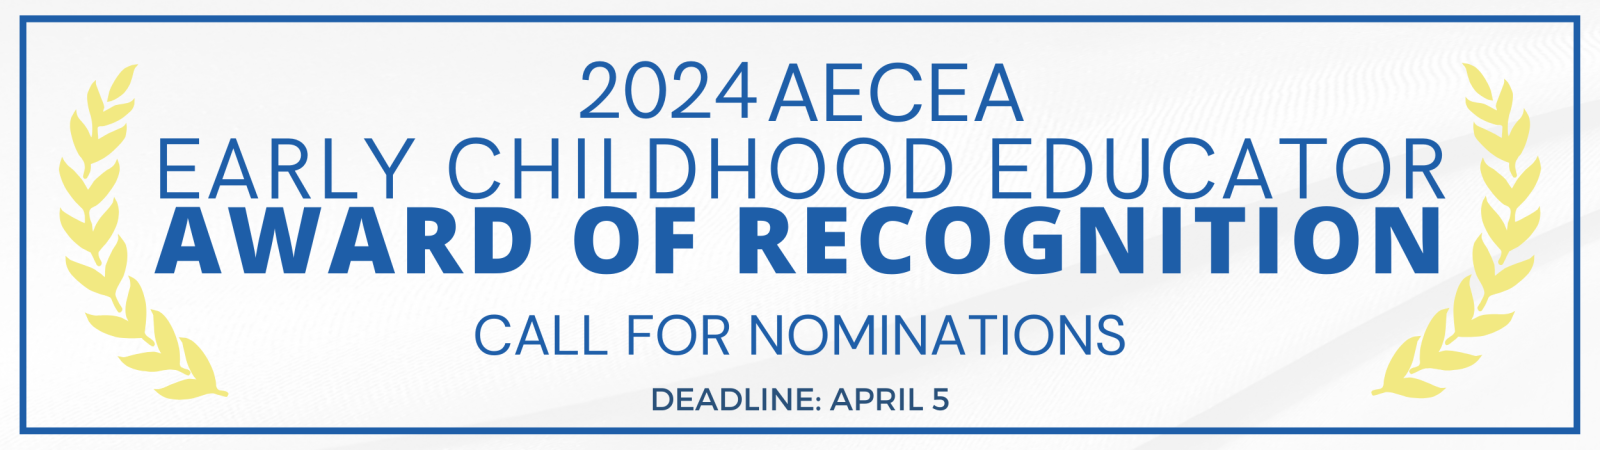 2024 AECEA ECE Award of Recognition Cover Photo Noms